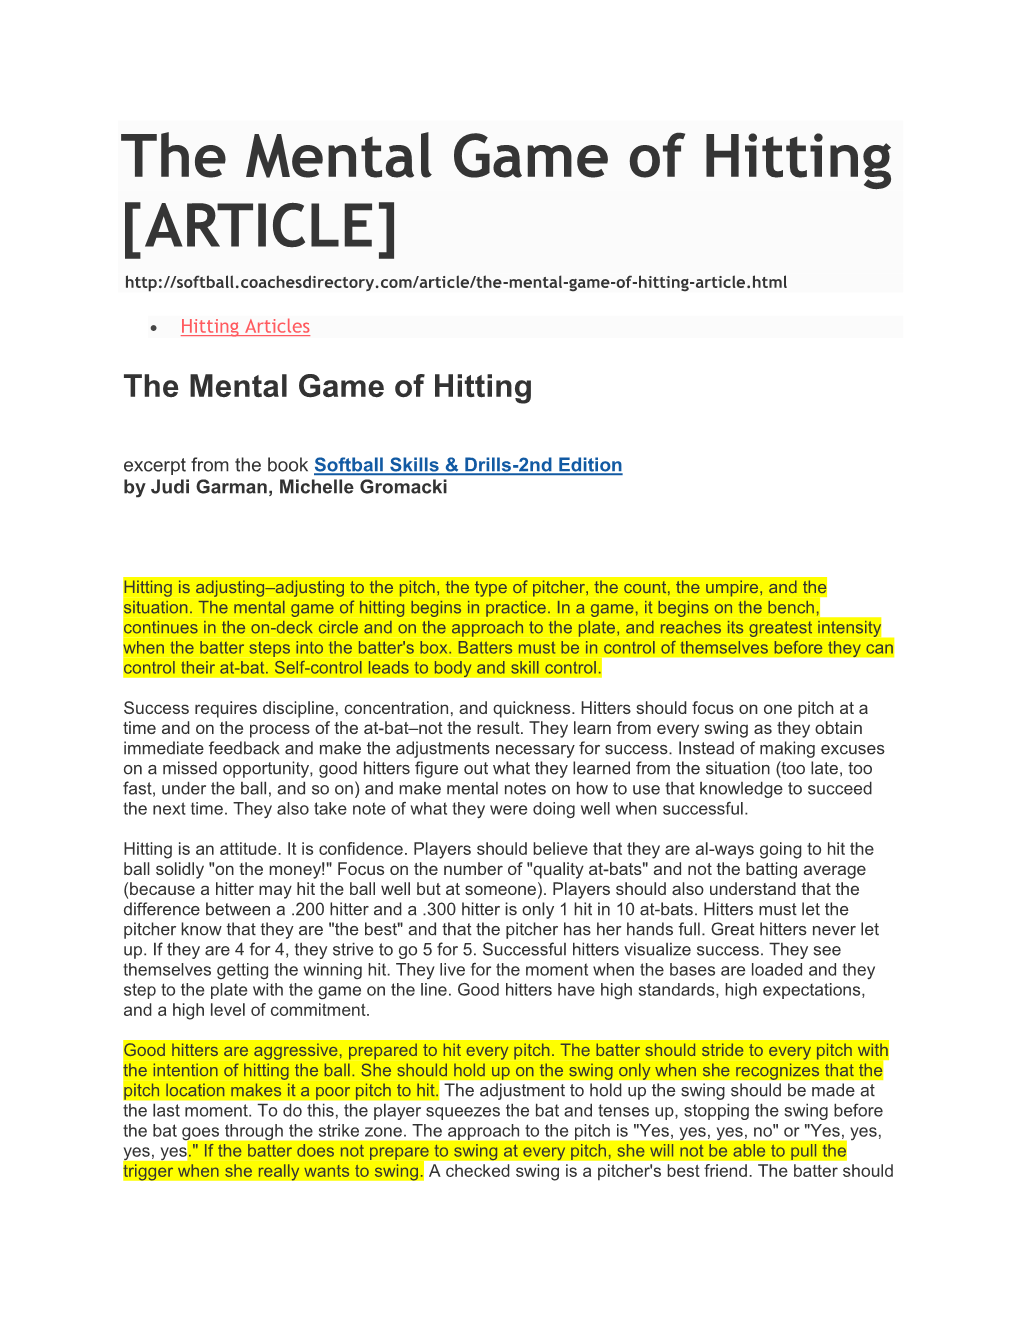 The Mental Game of Hitting [ARTICLE]